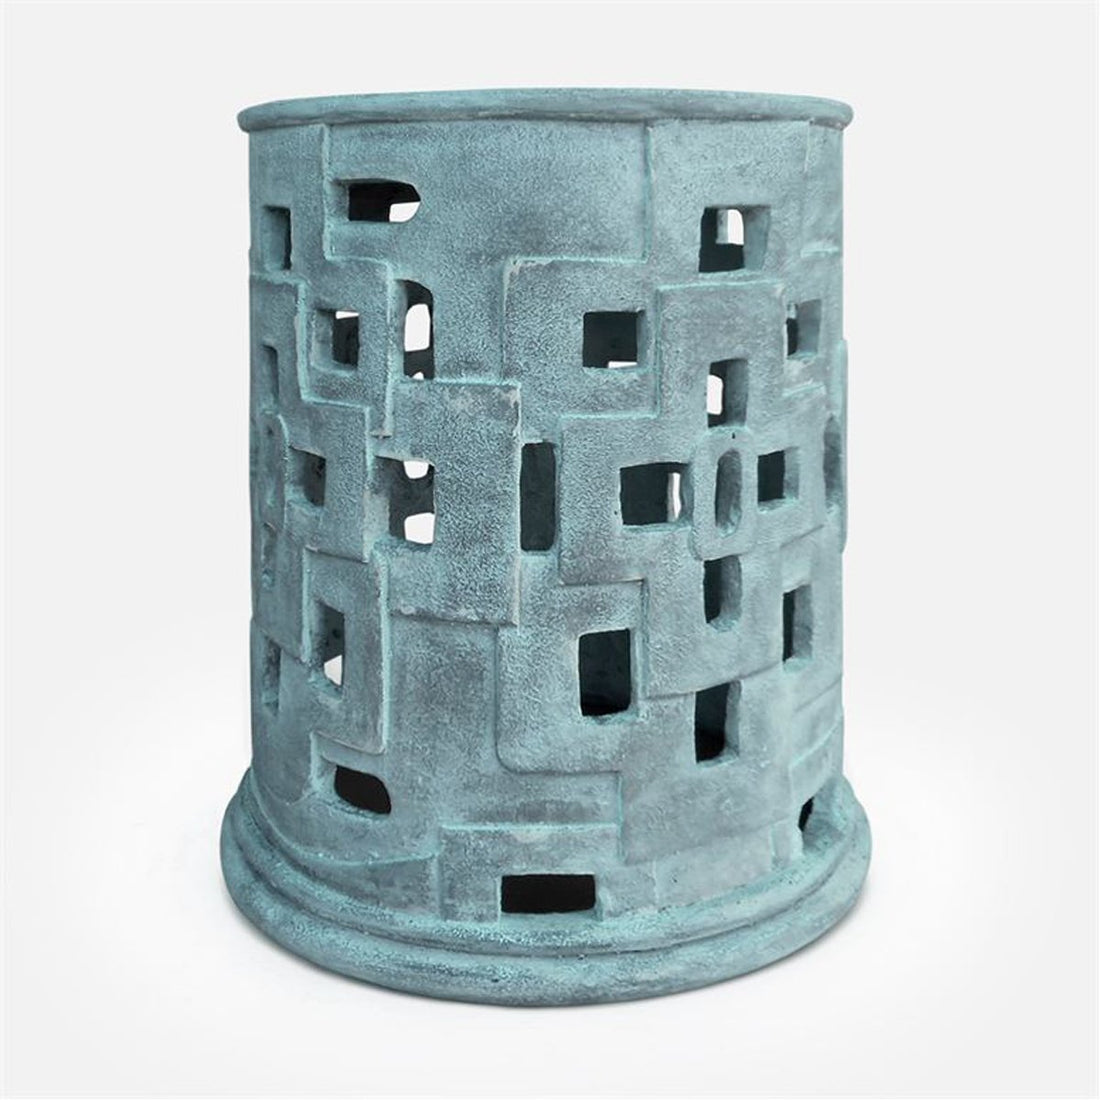 Made Goods Edan Concrete Outdoor Stool with Square Cutouts